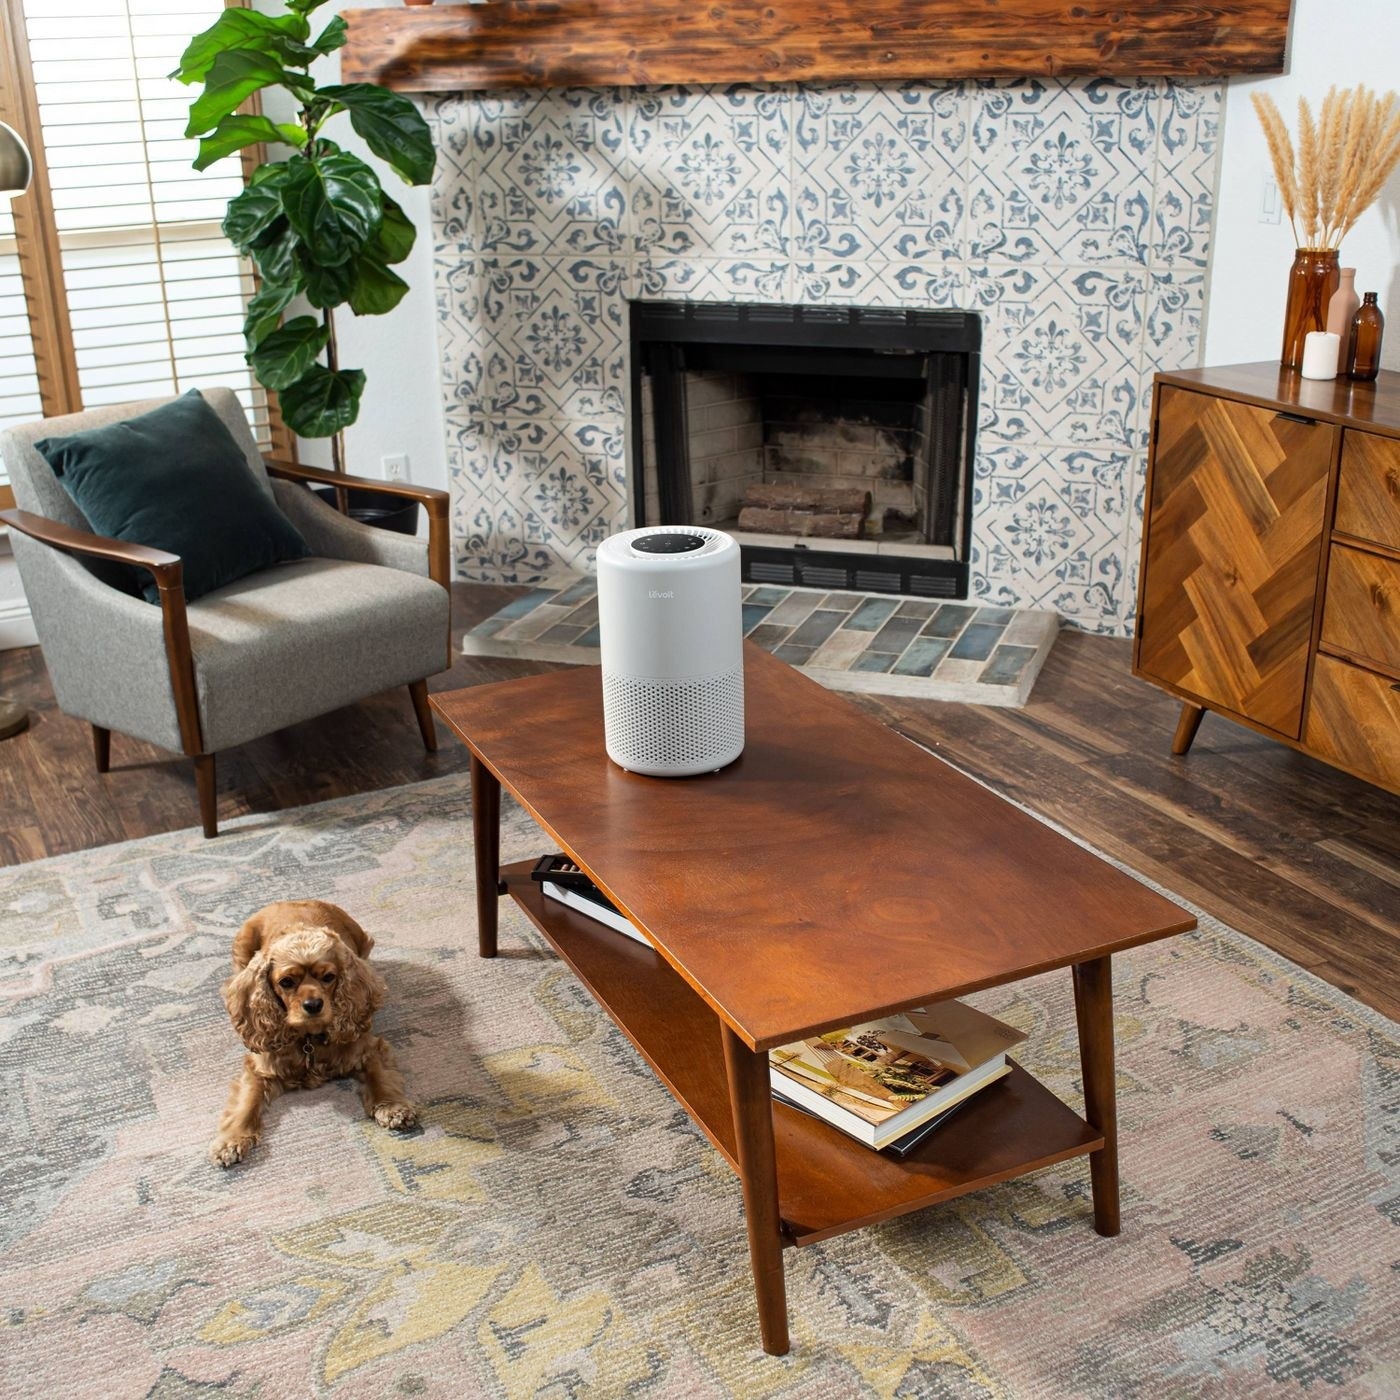 gray cylindrical air purifier on a wood table in a room with furniture and a dog